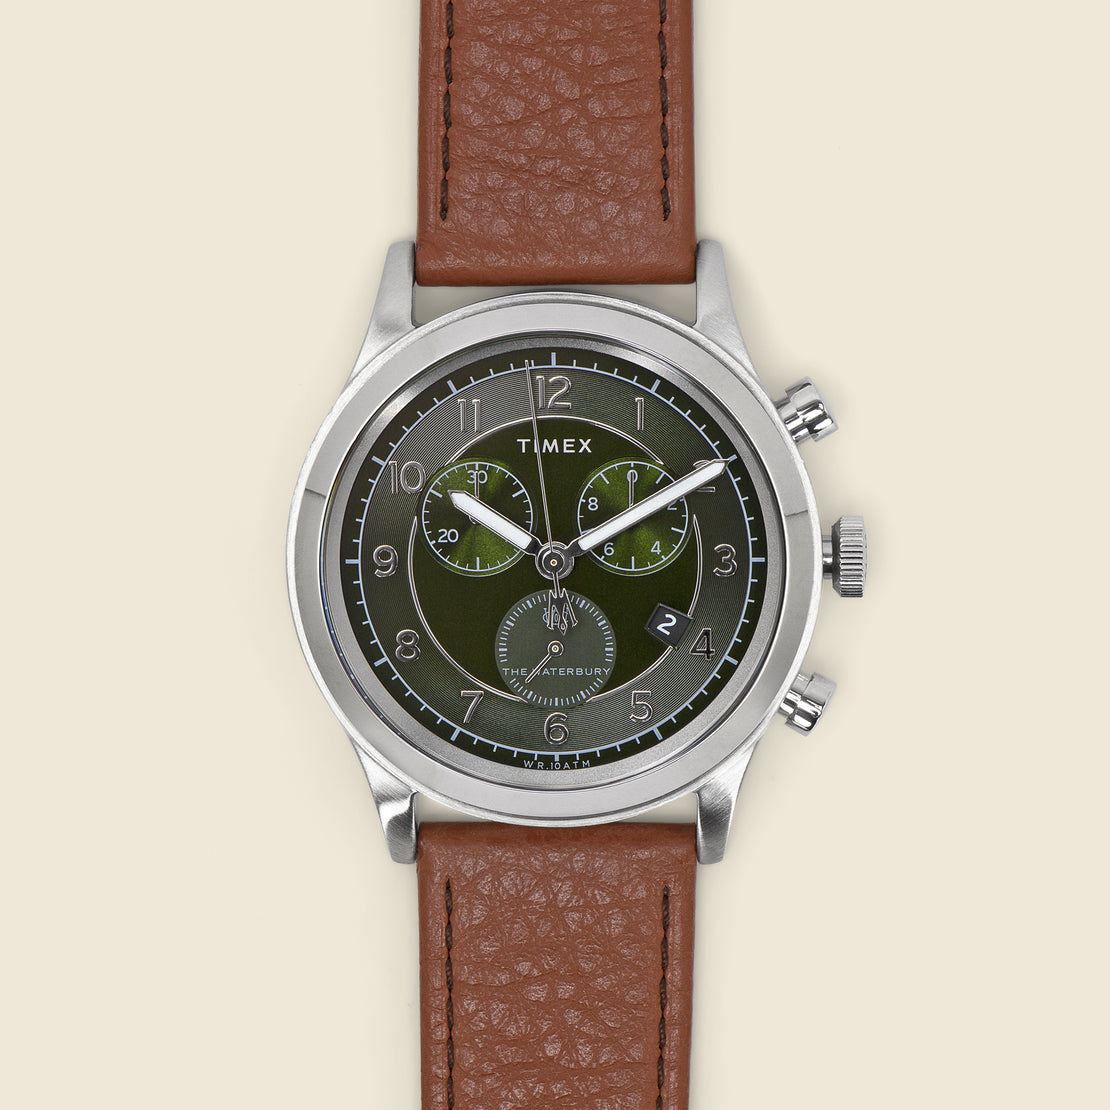 Timex Waterbury Traditional Chronograph Watch 42mm - Olive/Brown Leather